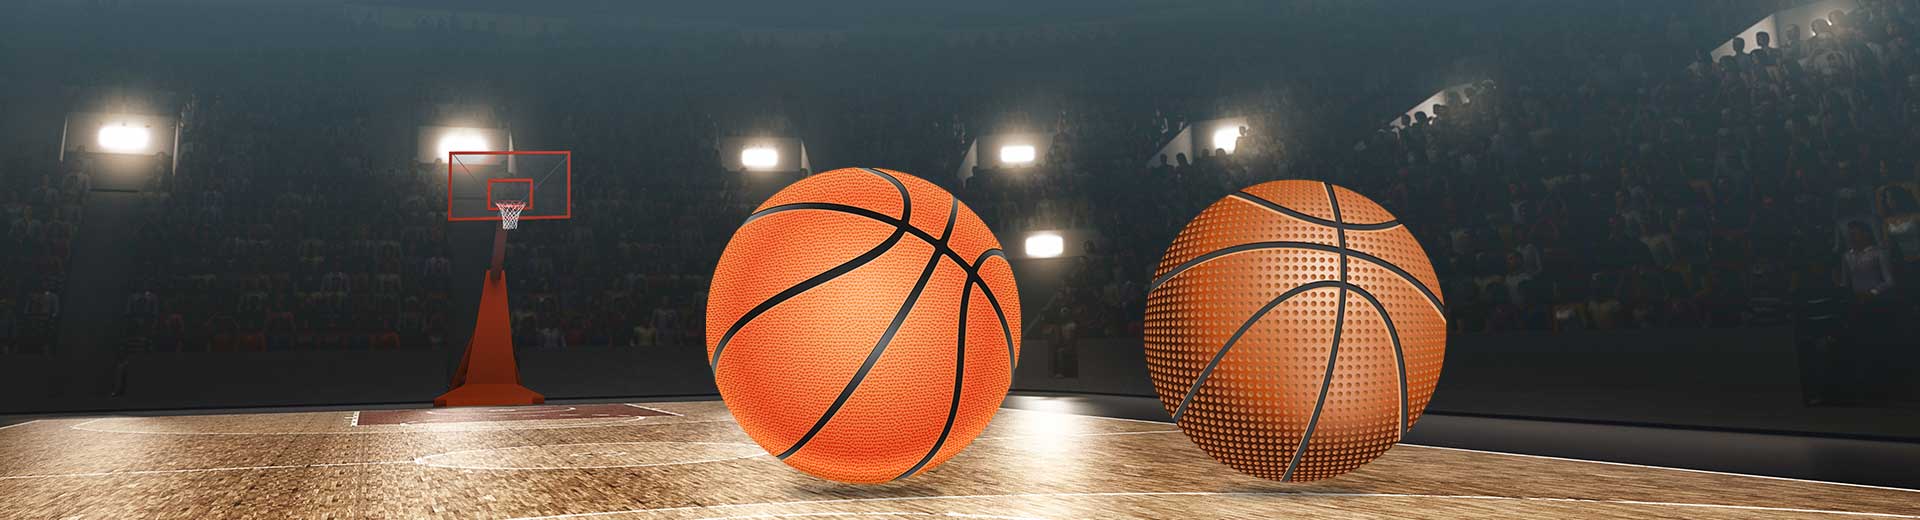 Basketballs Manufacturers in Cologne